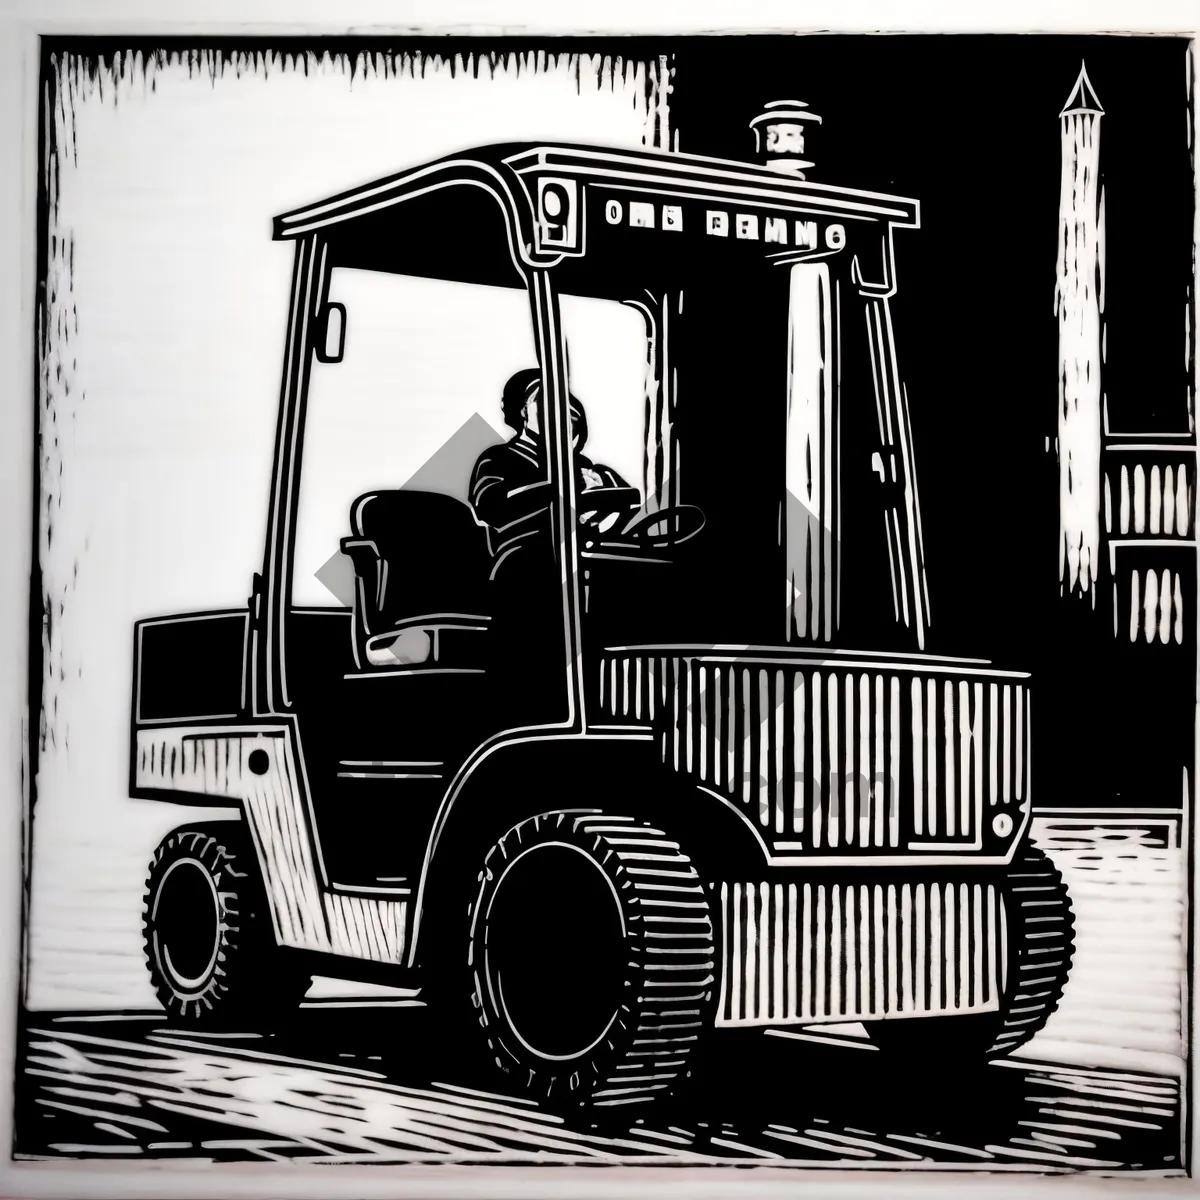 Picture of Transportation forklift carrying cargo in industrial setting.